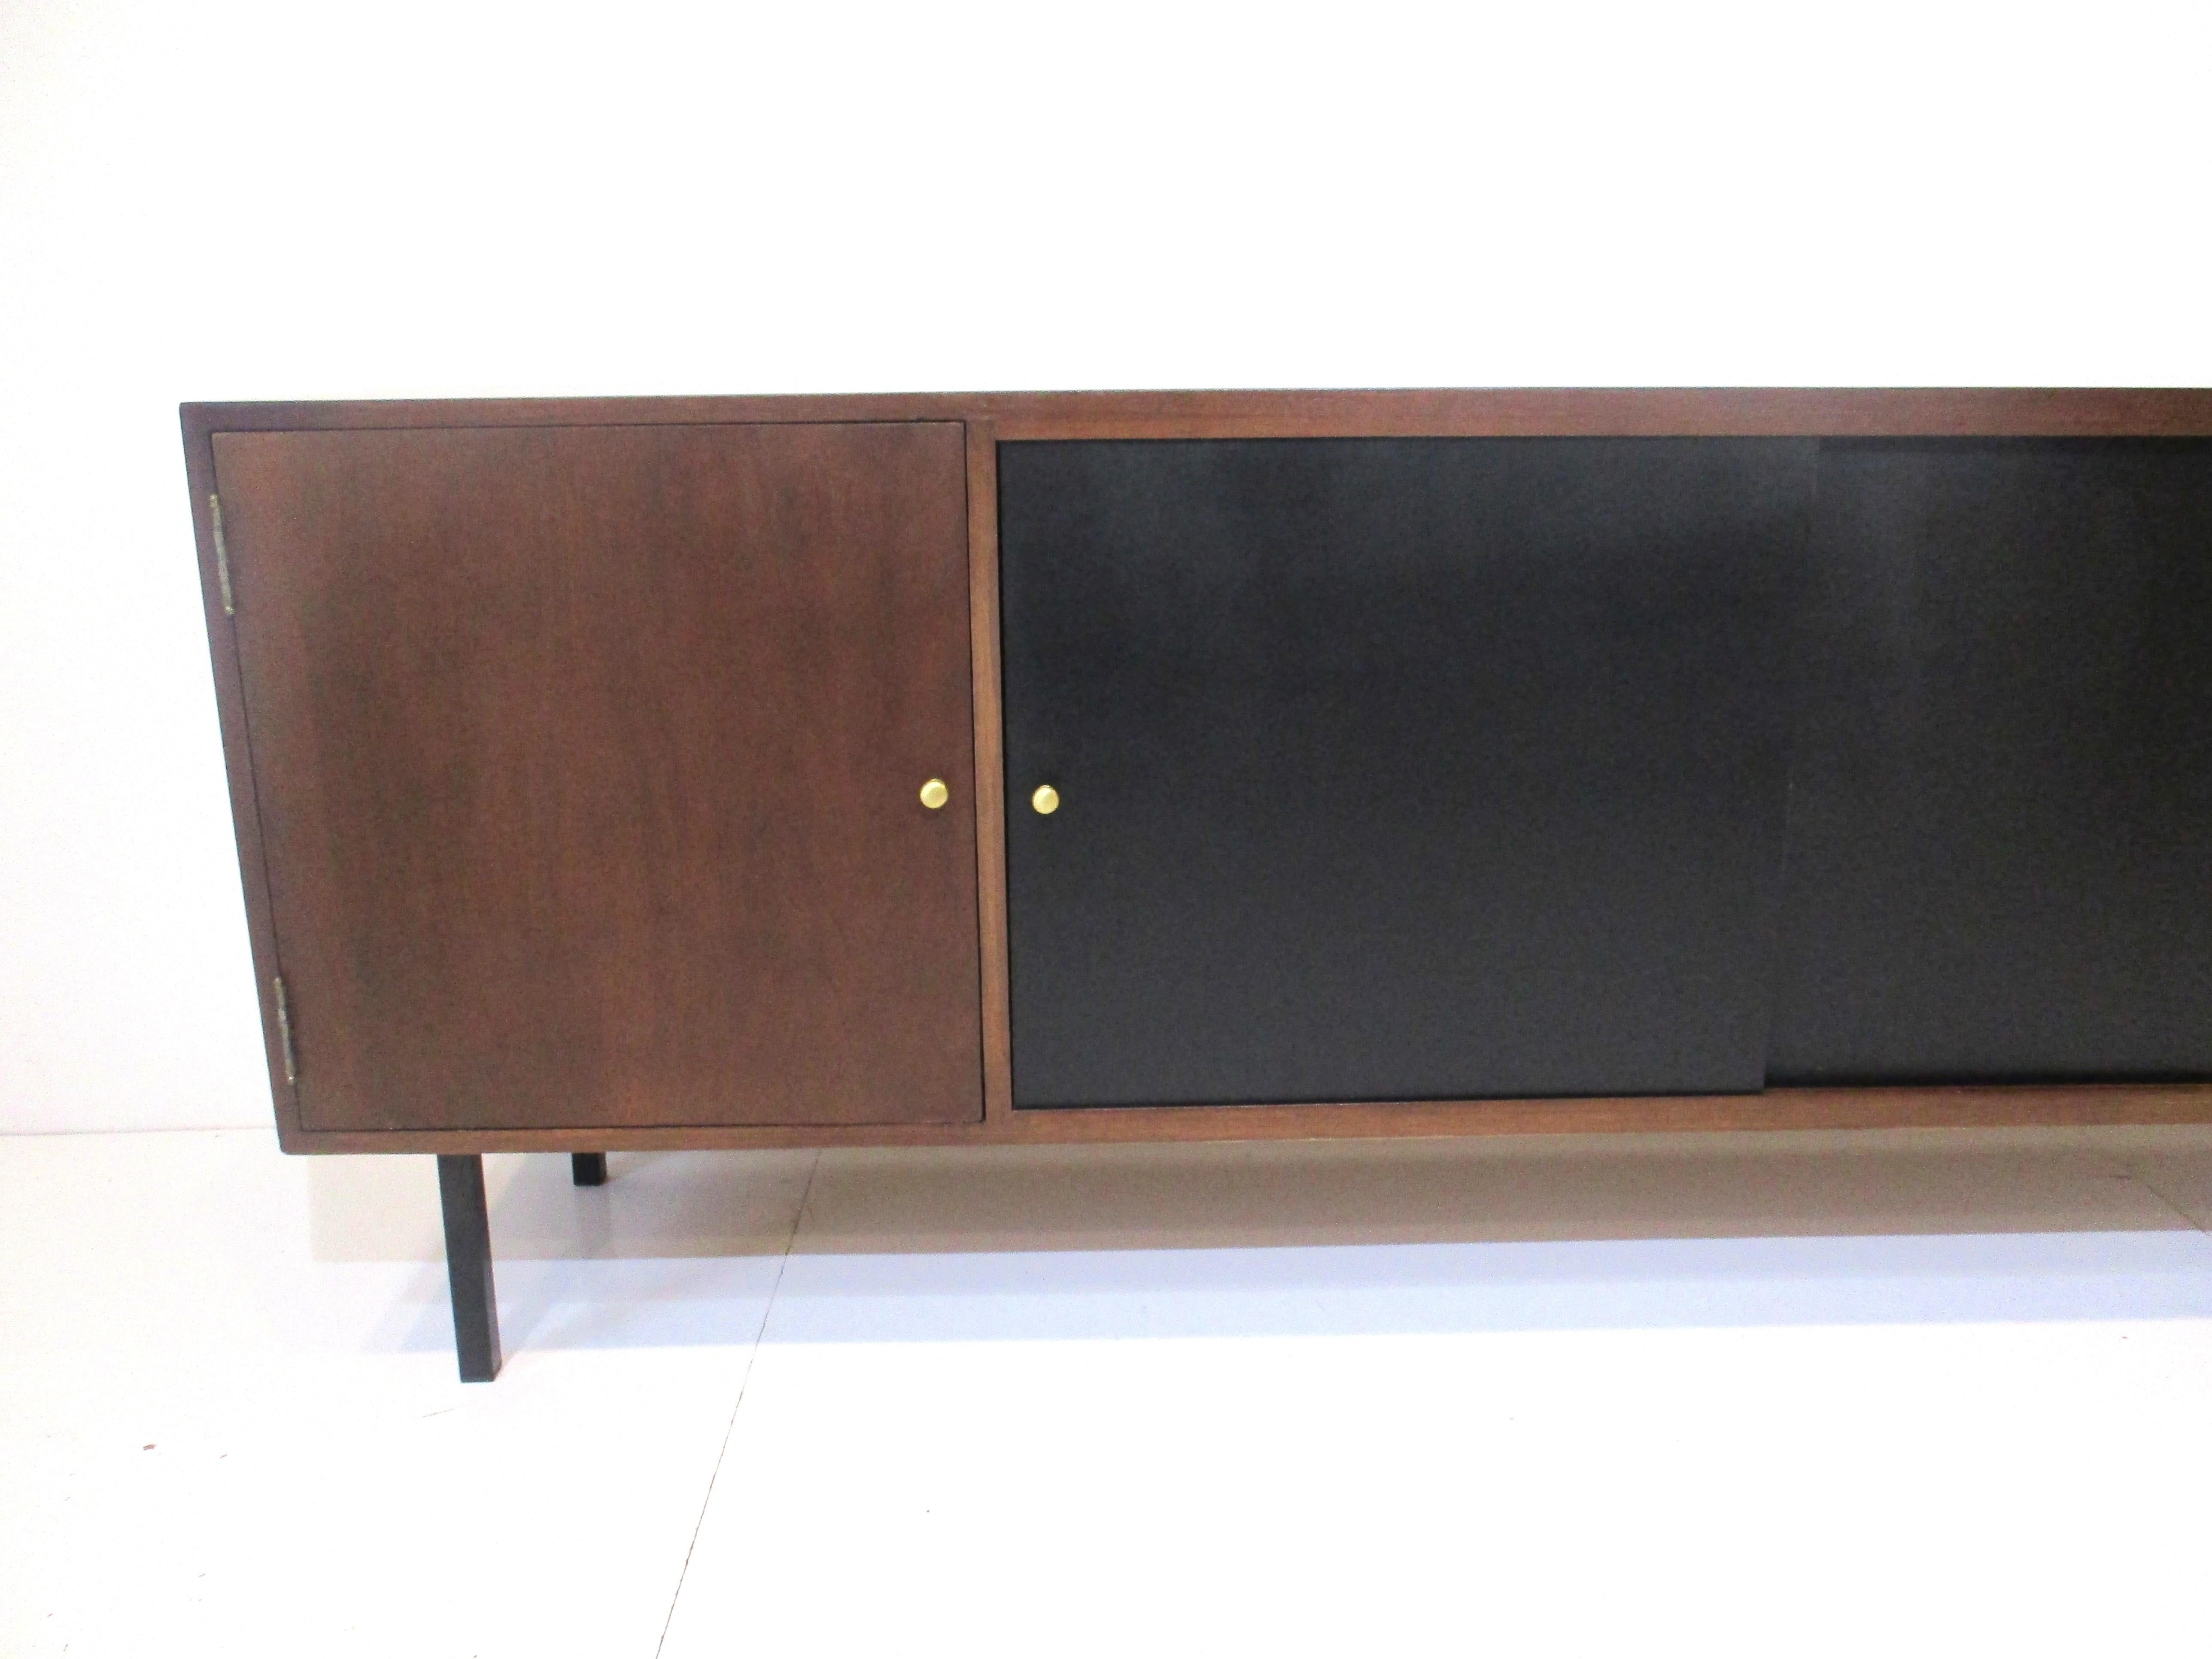 A walnut credenza with two sliding center doors in a satin black finish with brass pulls and two outer doors that swing open. Inside the end storage areas are fixed shelves for storage as is the center shelve all sitting on black steel legs designed